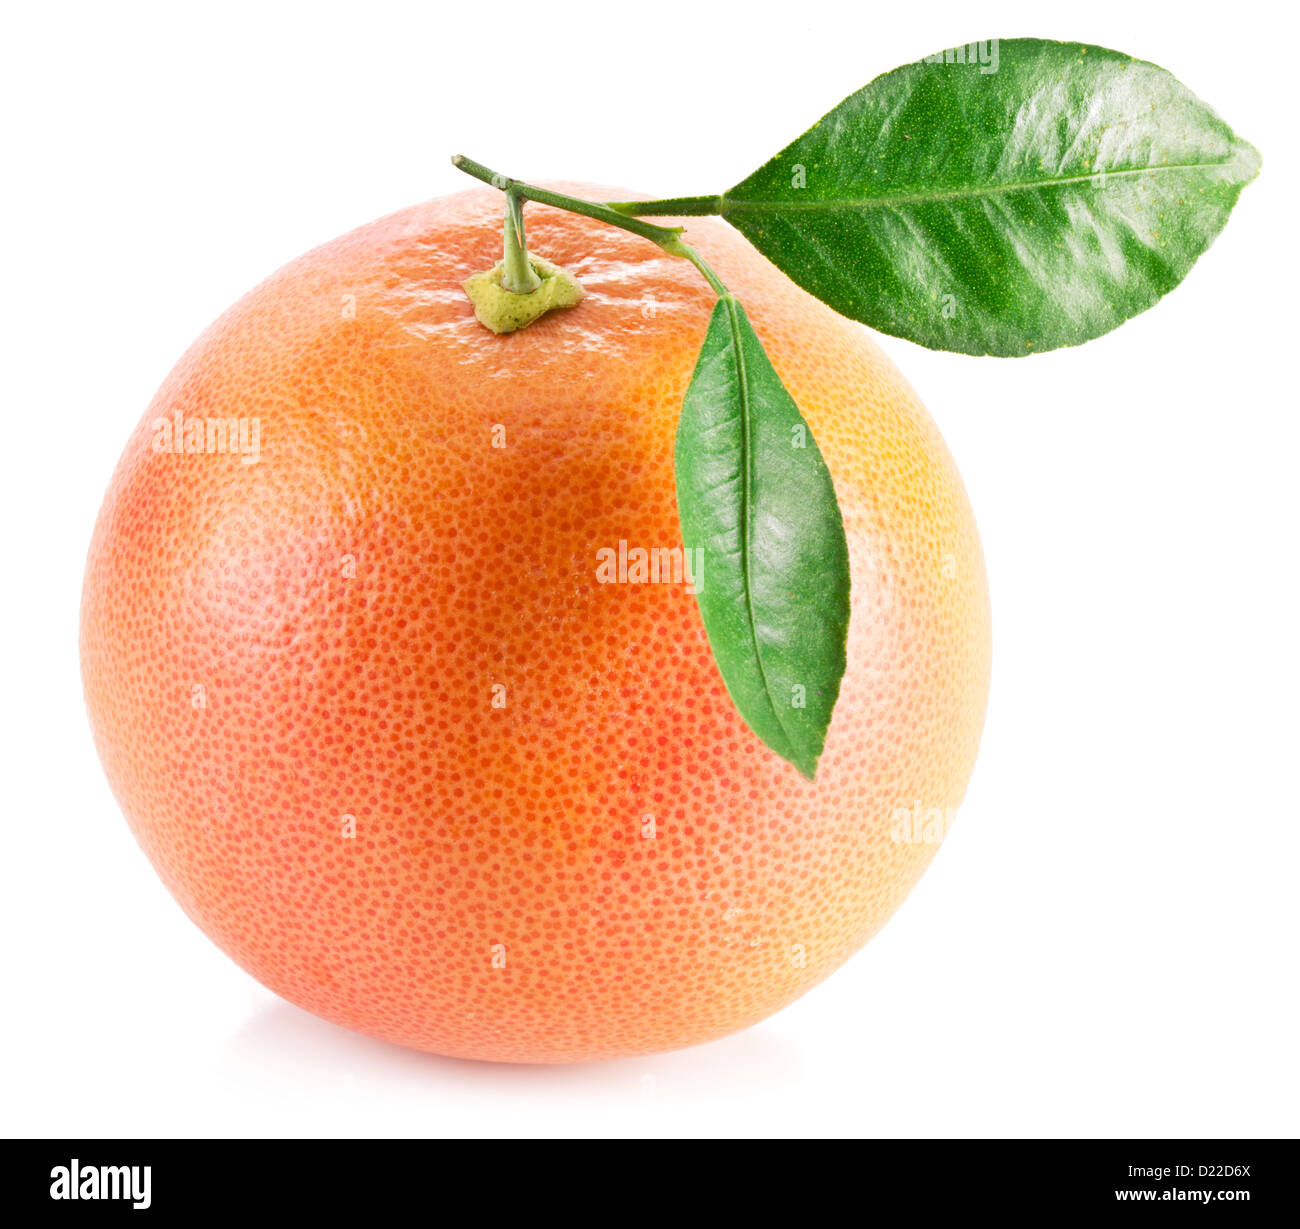 Grapefruit with leaves on a white background. Stock Photo